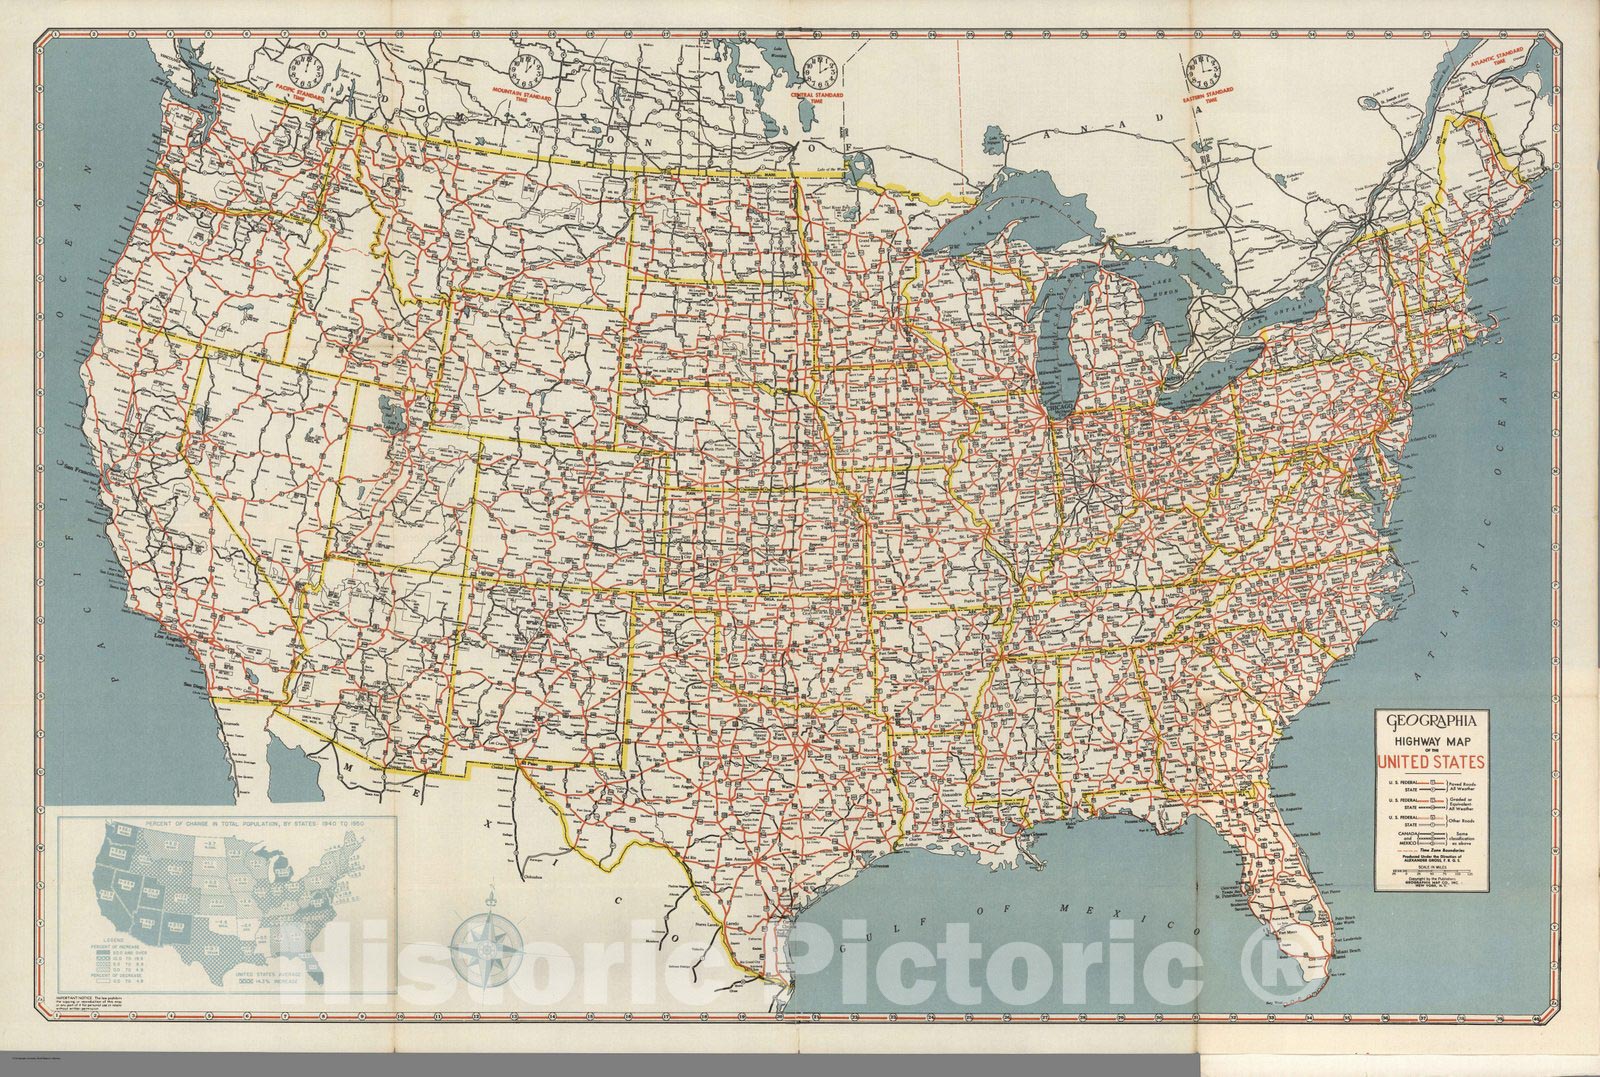 Historic Map : Geographia highway map of the United States, 1950 - Vintage Wall Art